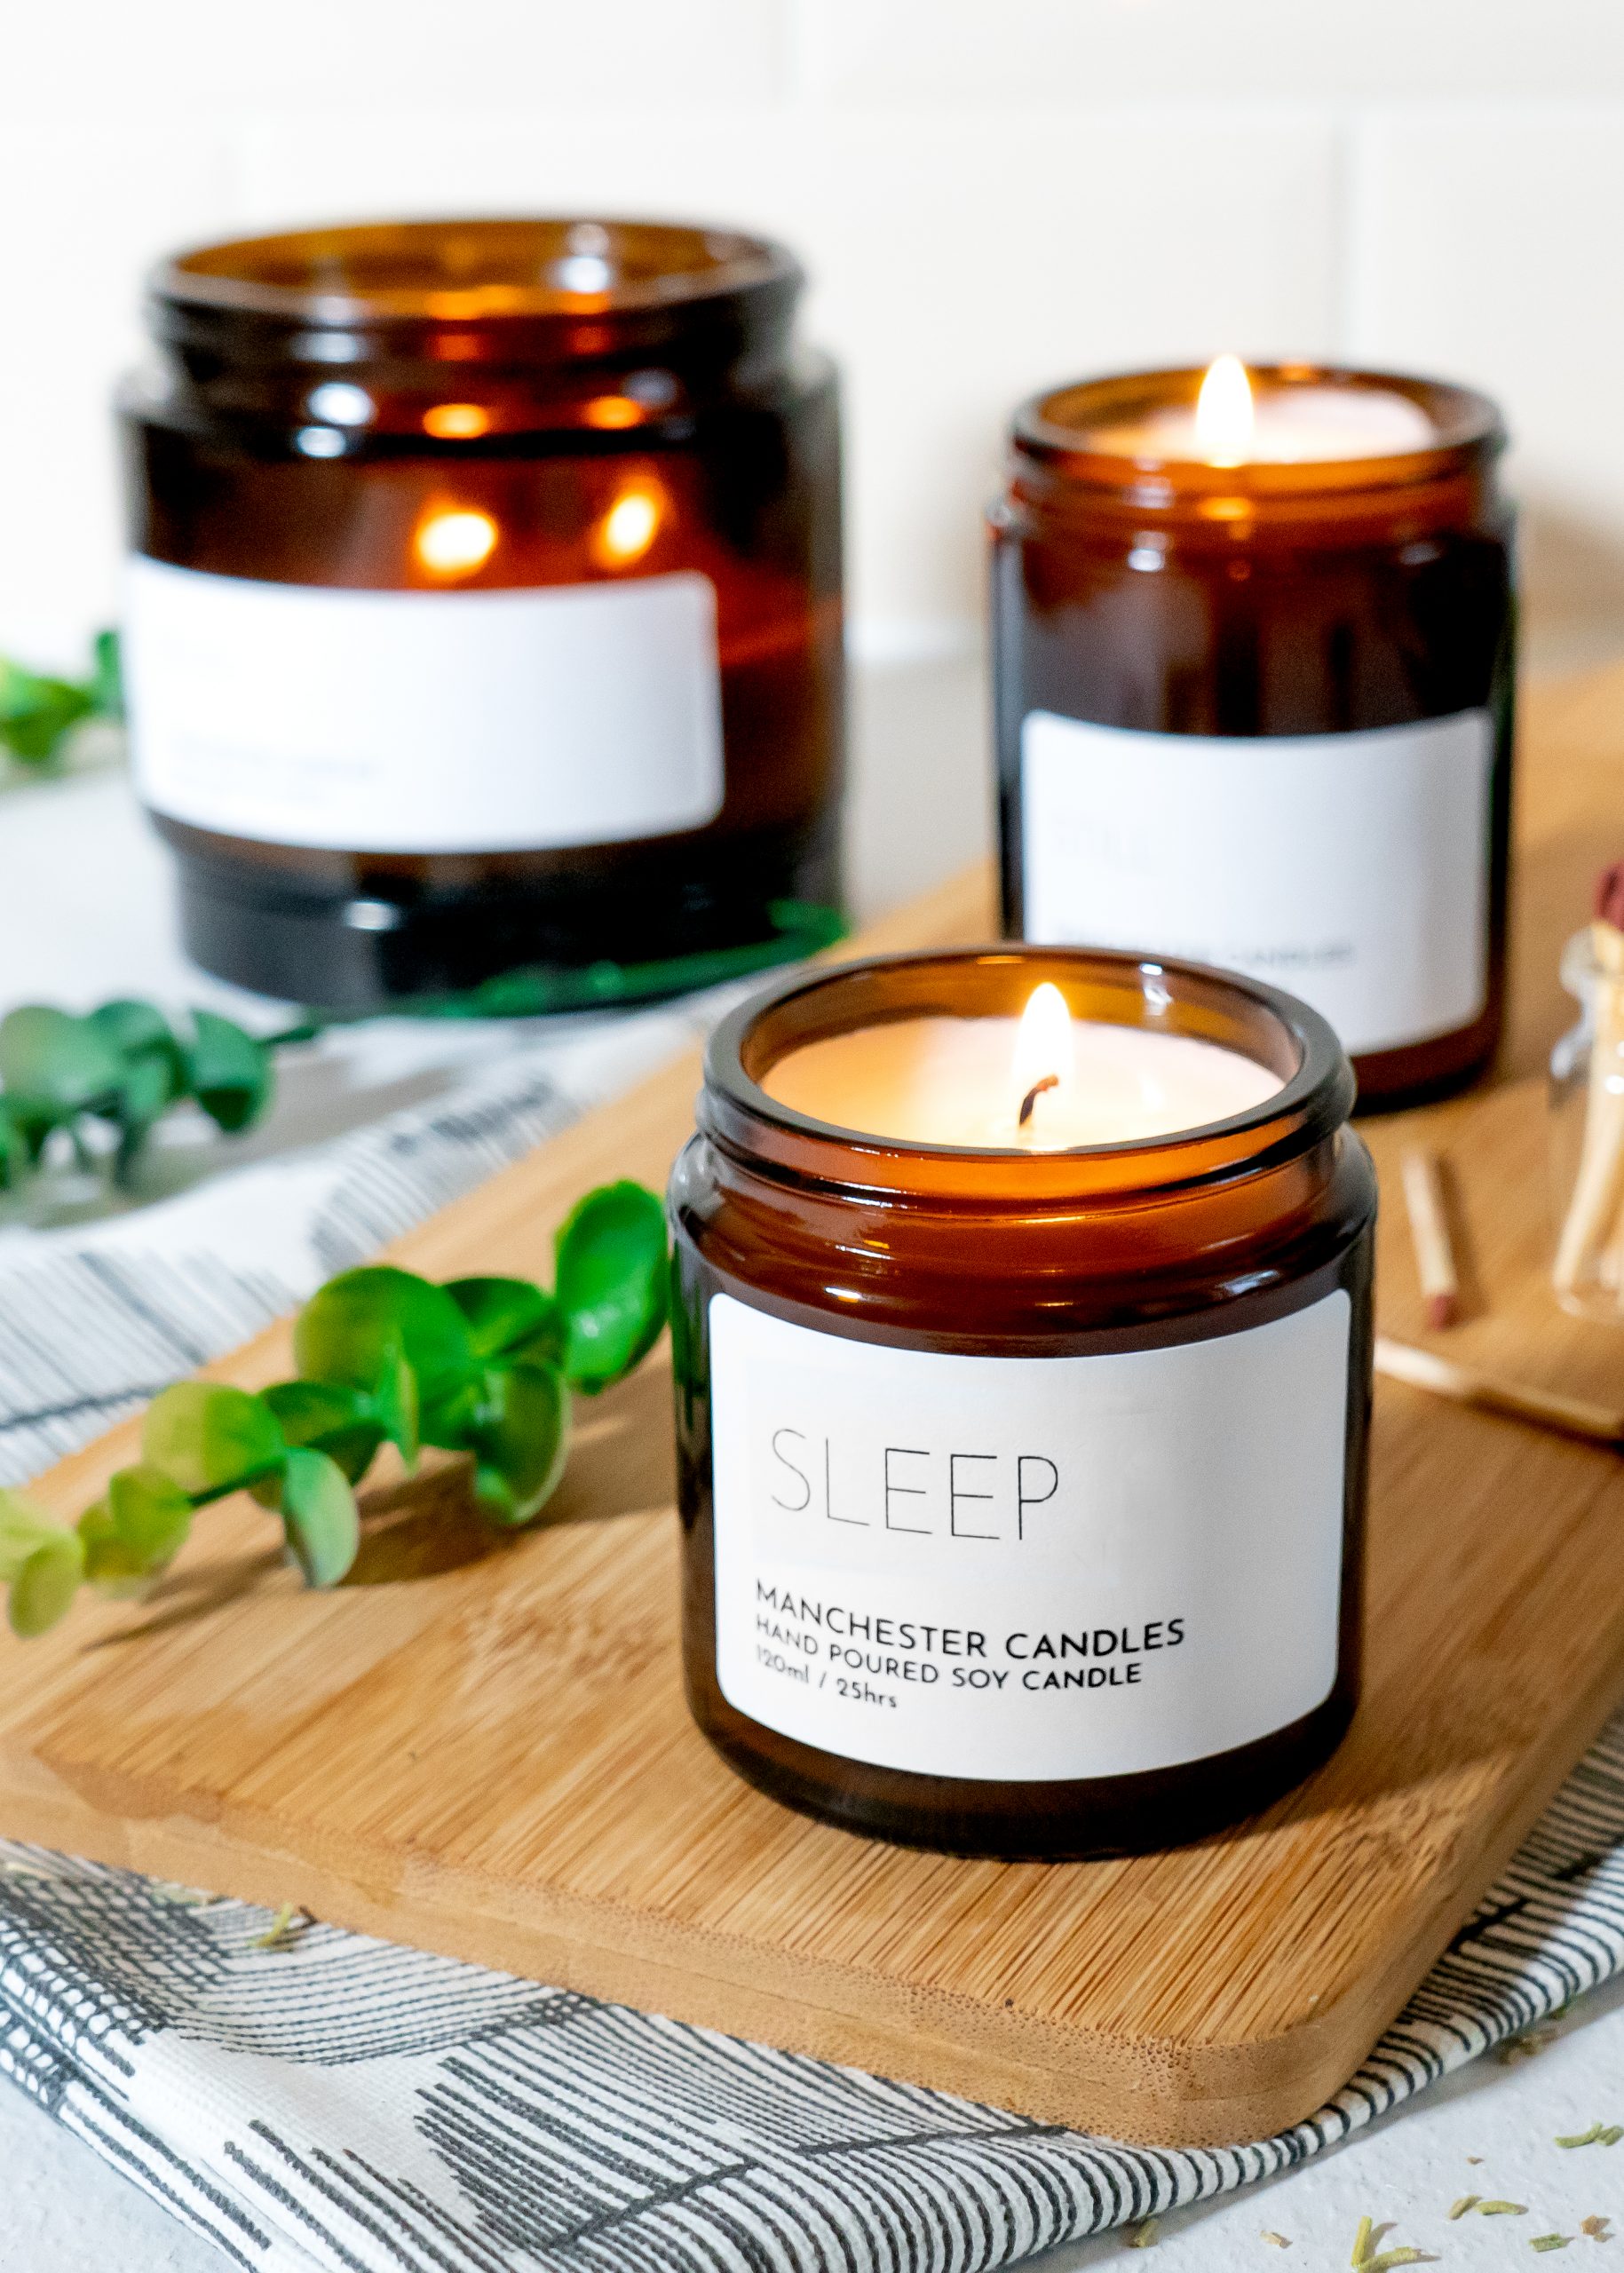 SLEEP Lavender Aromatherapy Candle - Manchester Candles